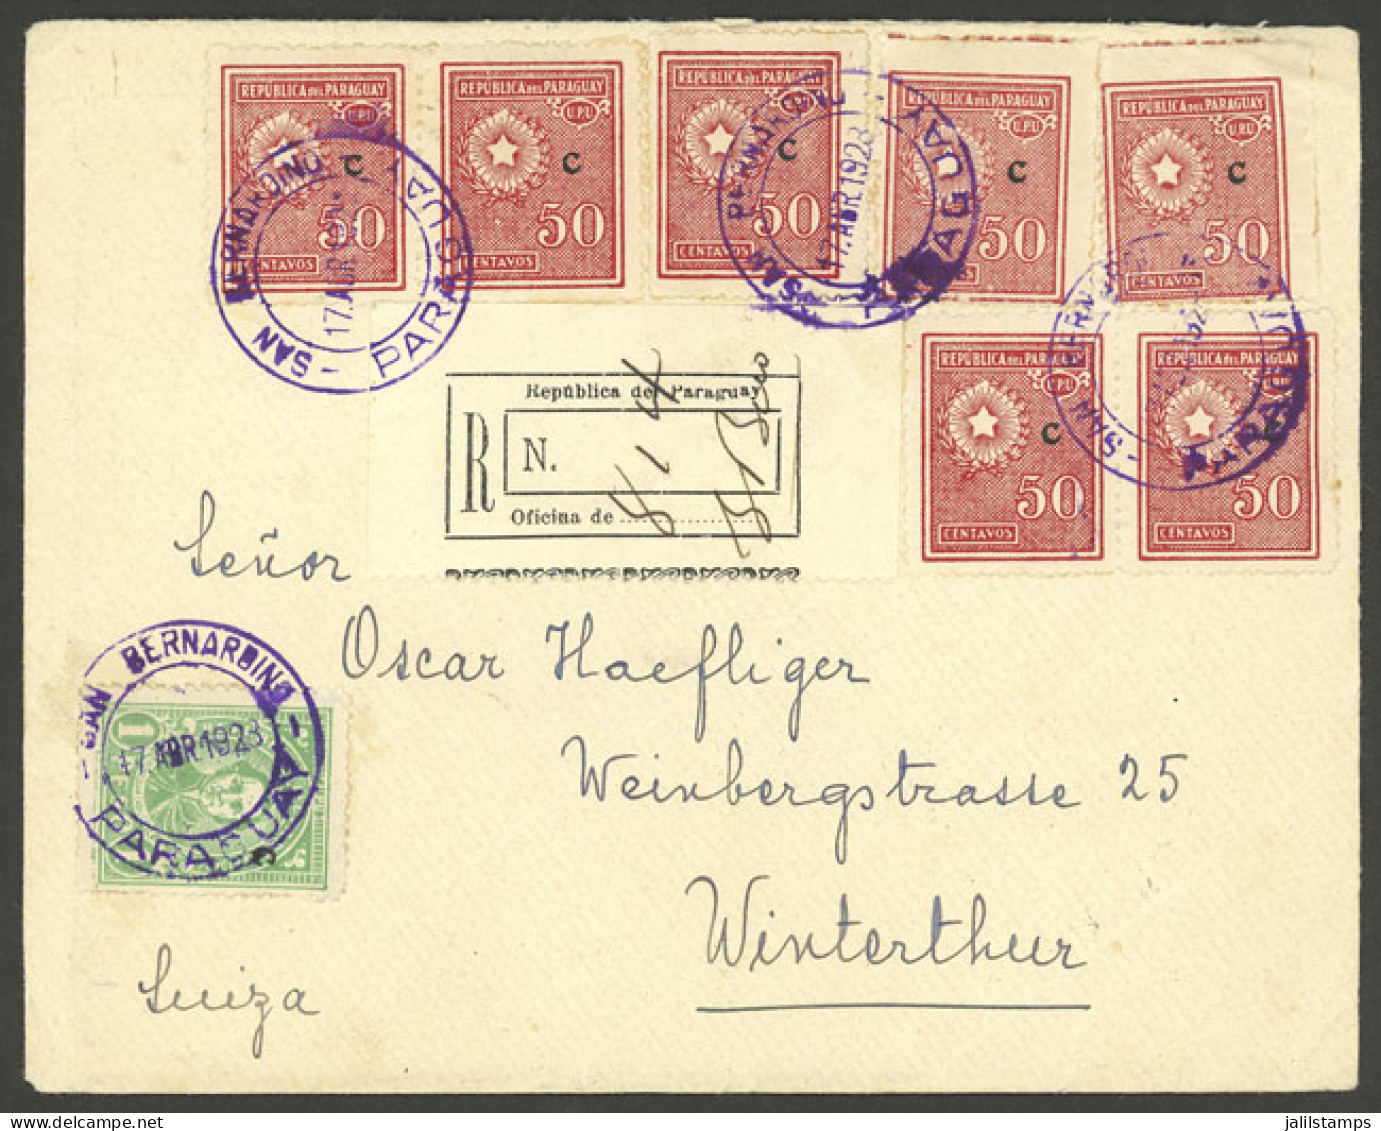 PARAGUAY: 17/AP/1928 SAN BERNARDINO - Switzerland, Registered Cover Franked With 4.50P. And Nice Postmarks, With Transit - Paraguay